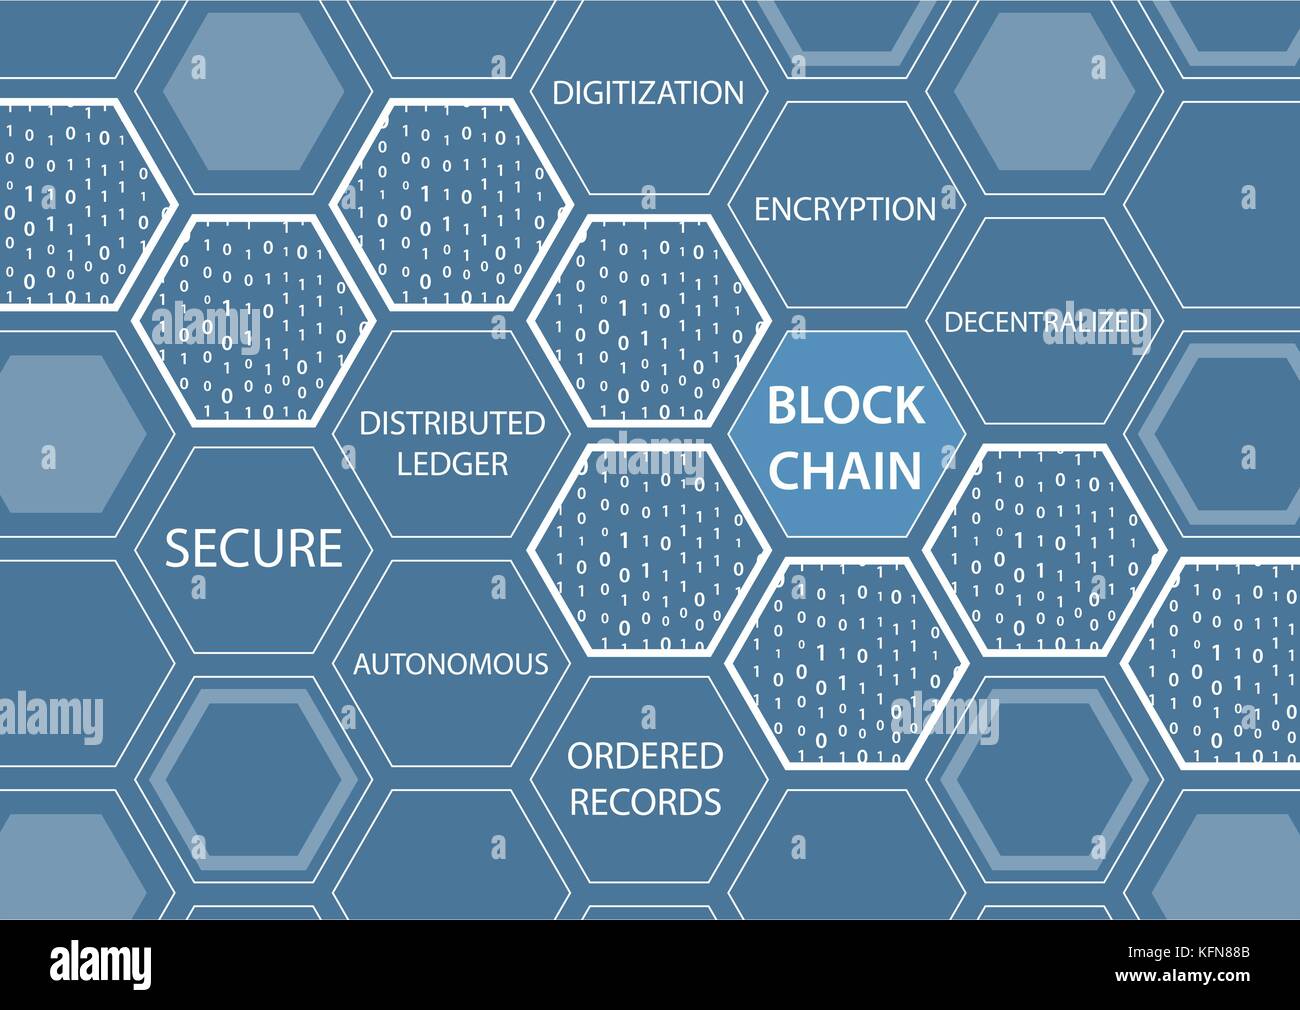 Vector illustration of blockchain concept with blue background. Connected hexagonal shapes. Stock Vector